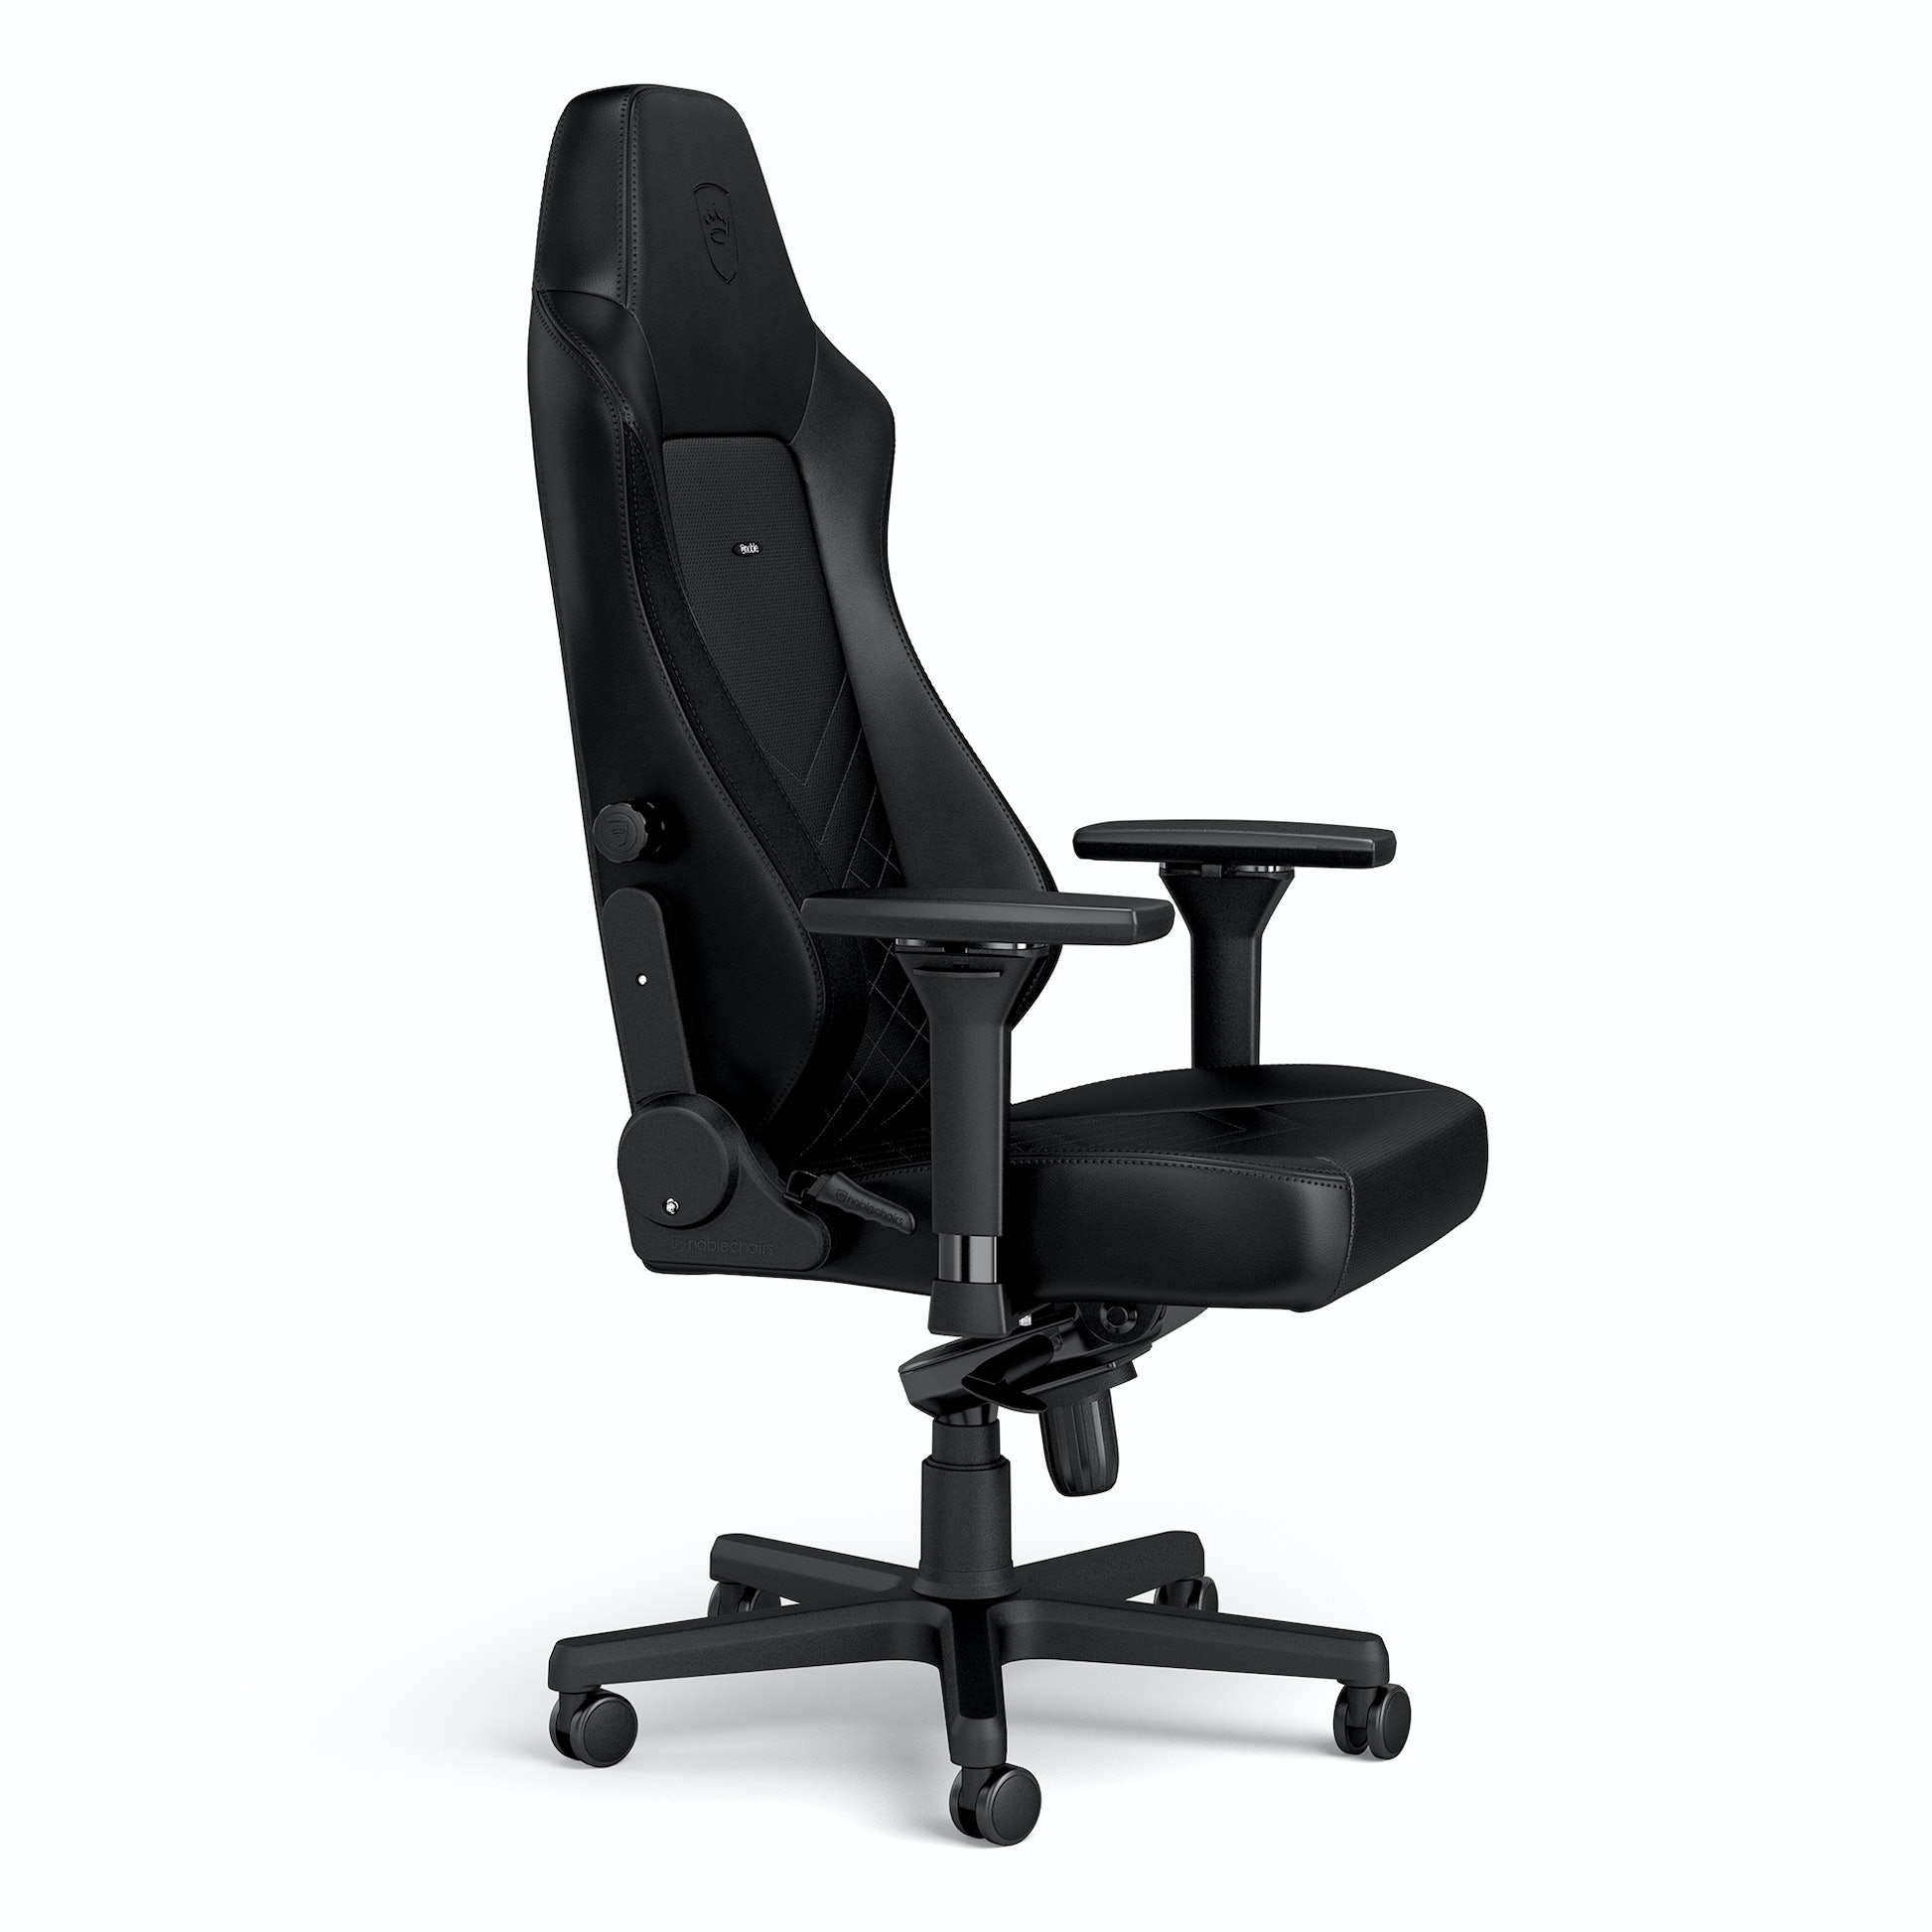 noblechairs - Cadeira noblechairs HERO - Black Panther Edition